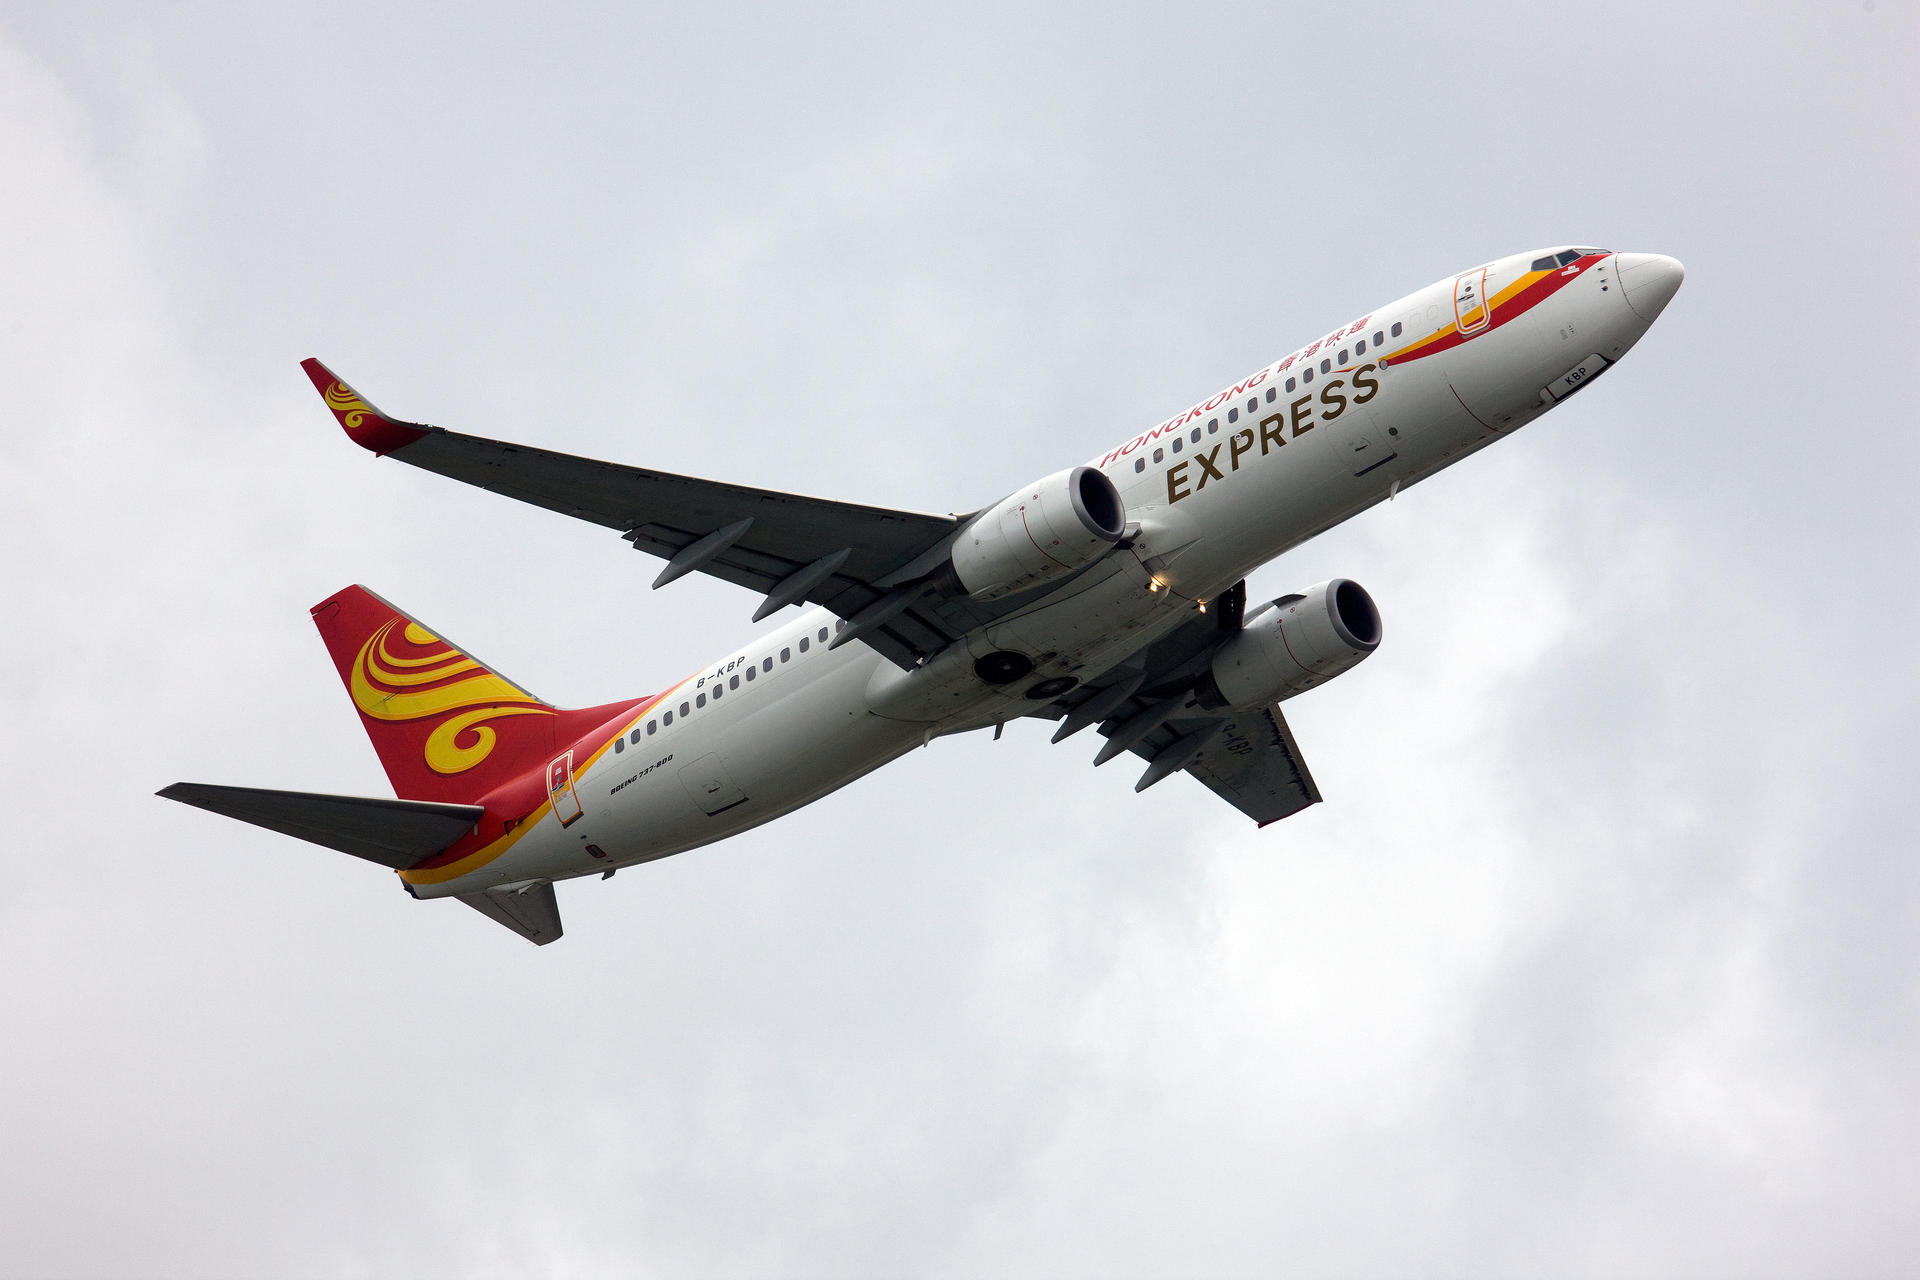 Hong Kong Express Airways operates five Airbus 320s for 10.94 hours each on average per day.